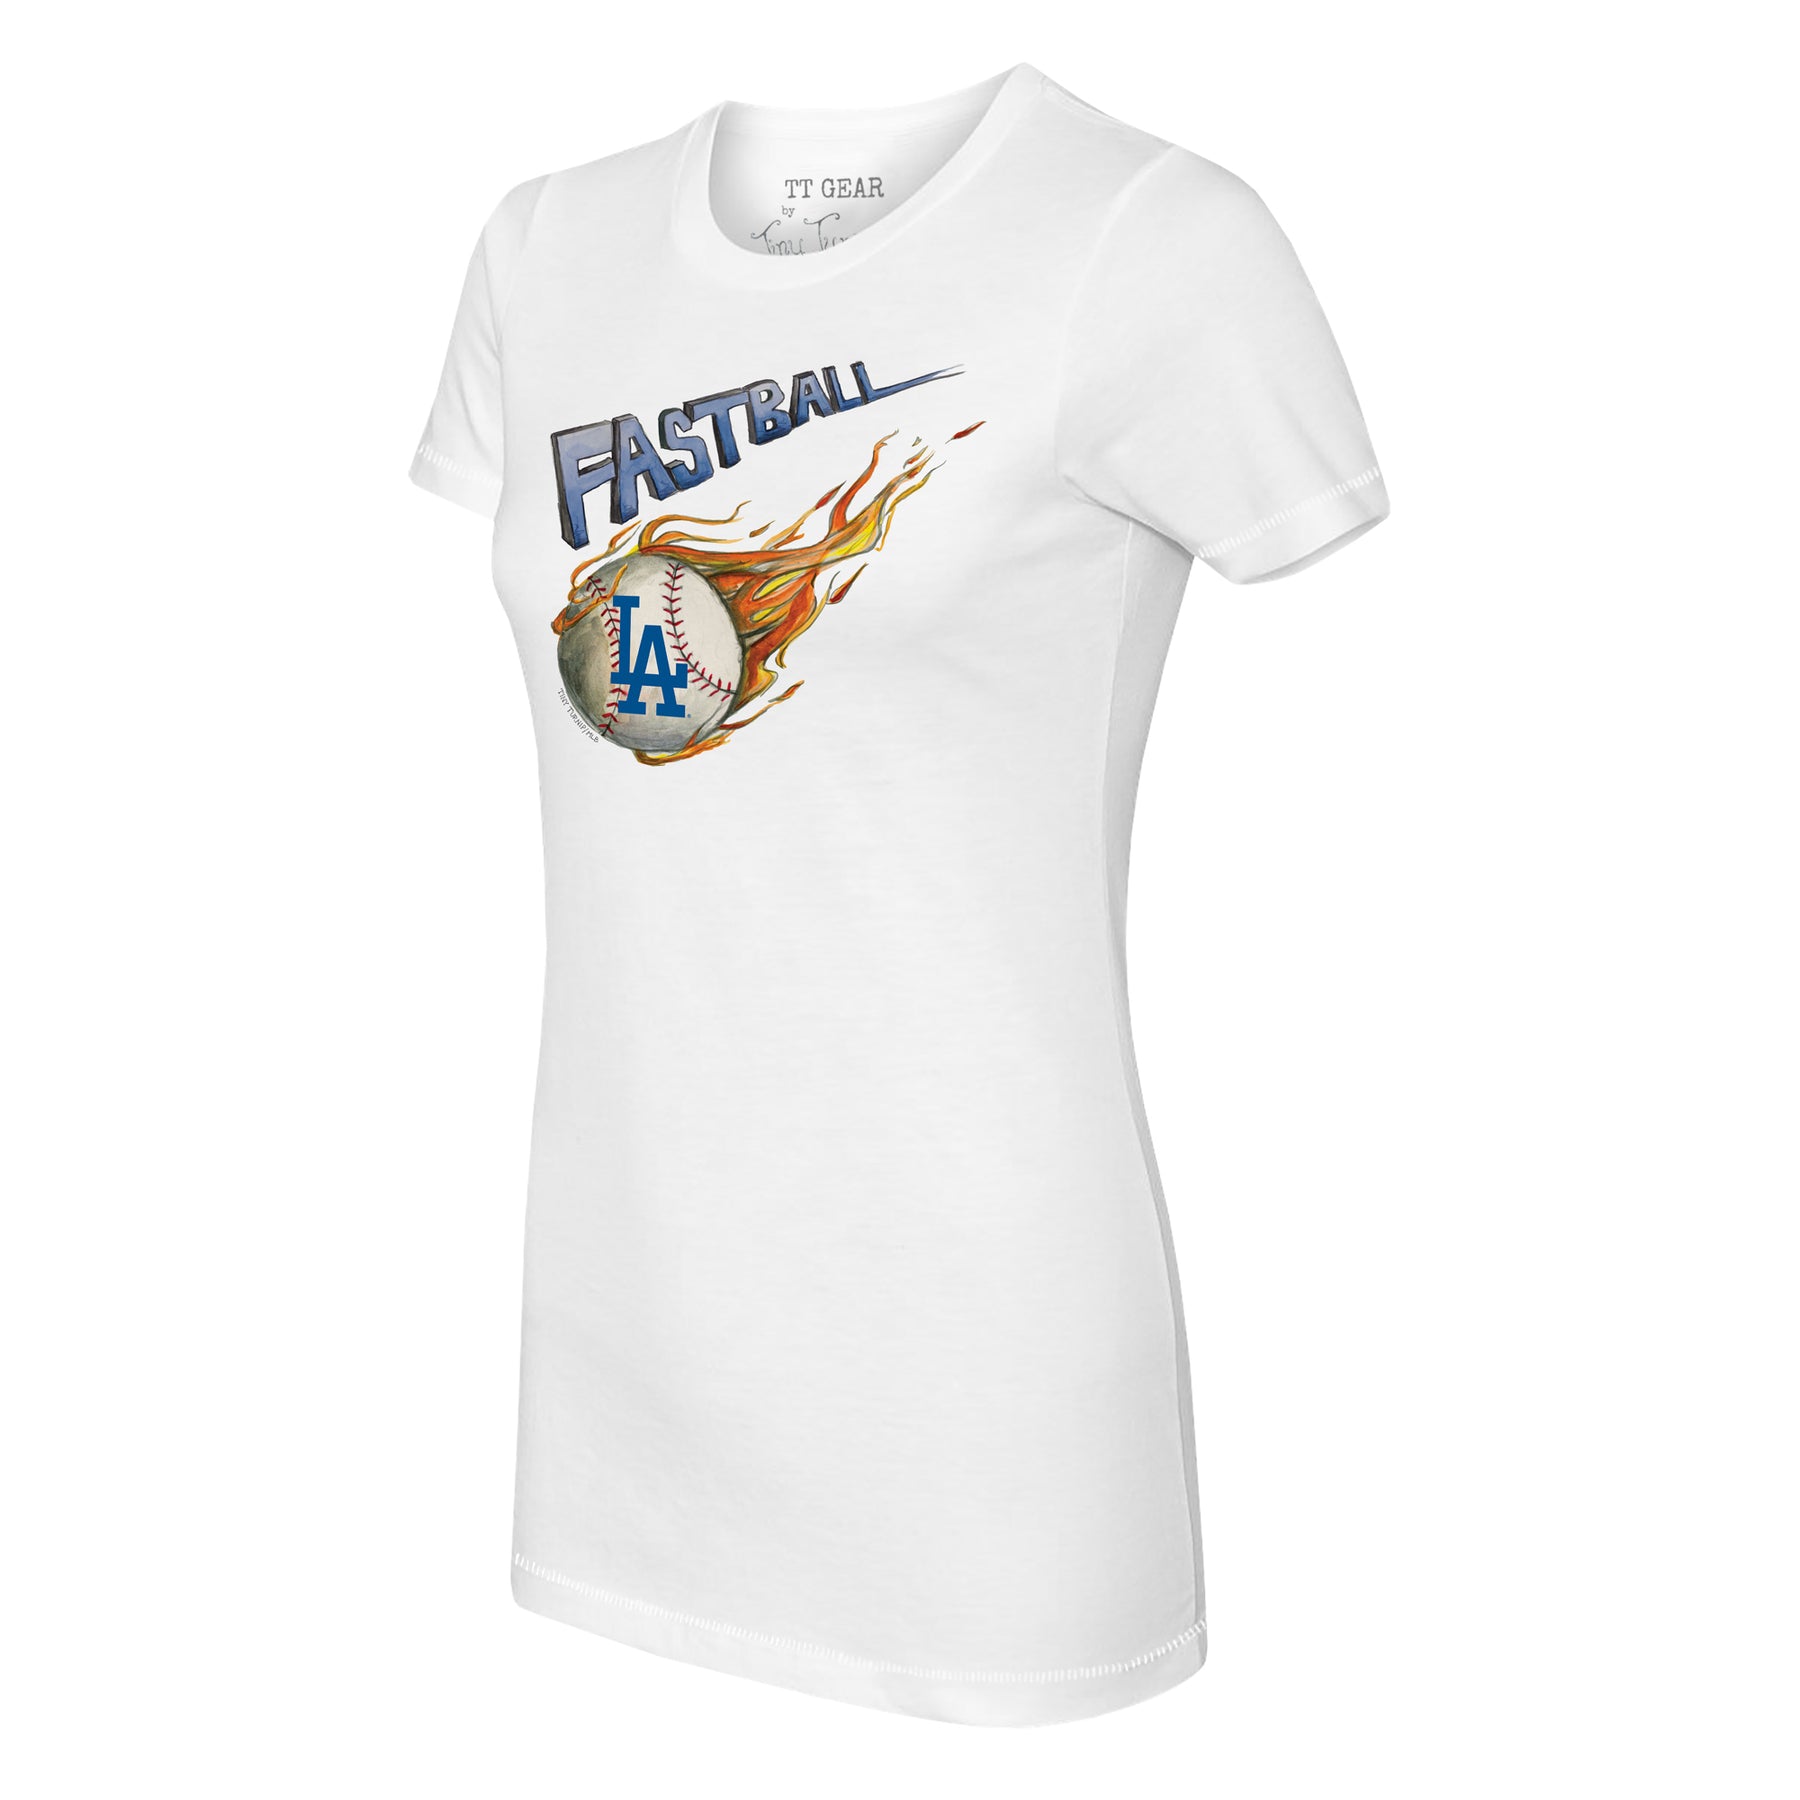 Los Angeles Dodgers Fastball Tee Shirt